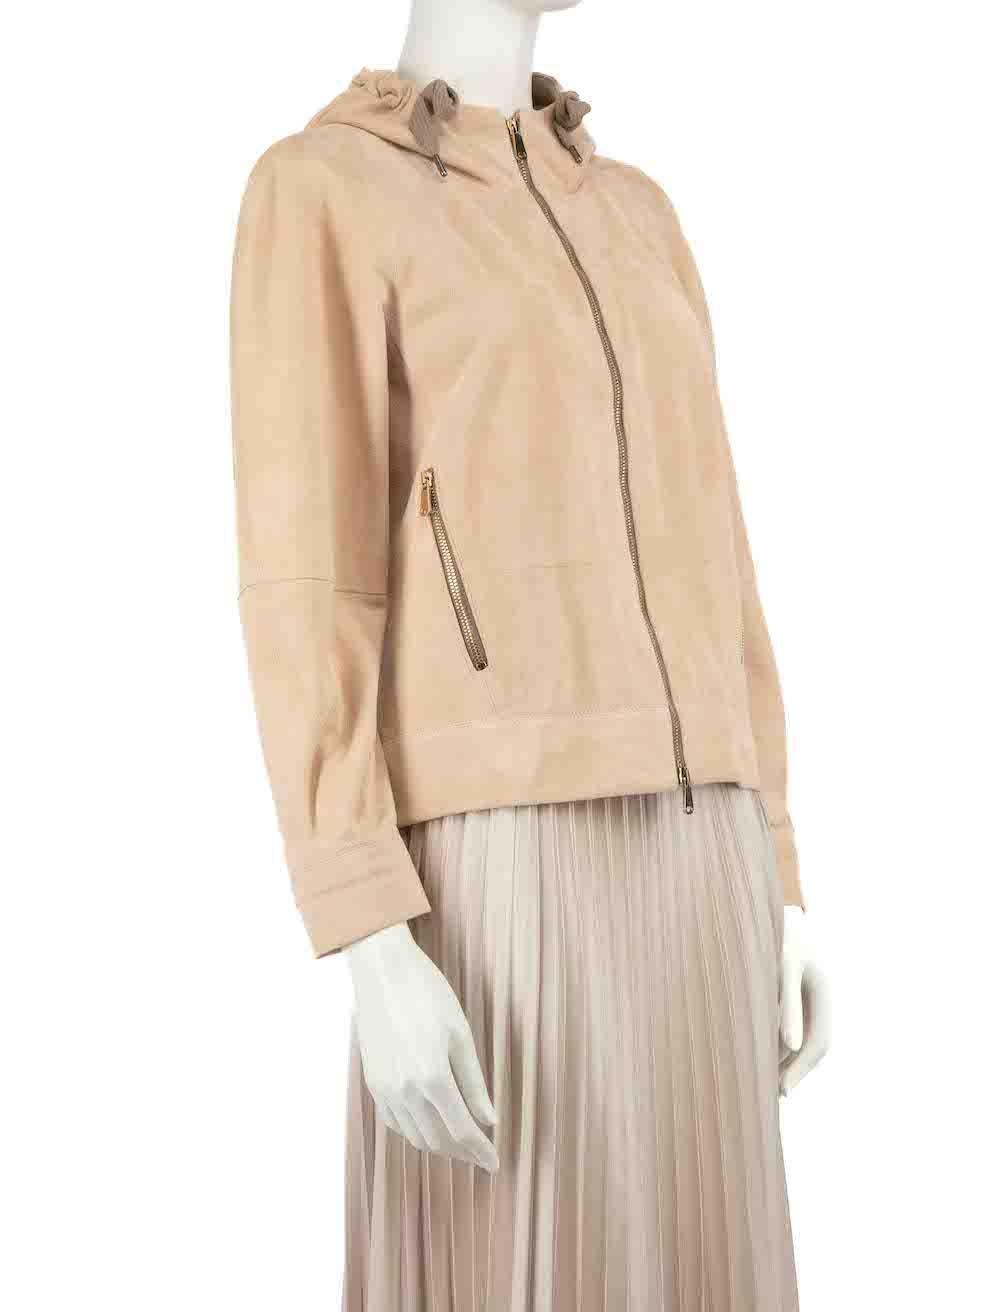 CONDITION is Very good. Minimal wear to jacket is evident. Minimal wear to the rear with small marks to the suede on this used Brunello Cucinelli designer resale item.
 
 
 
 Details
 
 
 Light pink
 
 Suede
 
 Jacket
 
 Hooded
 
 Zip fastening
 
